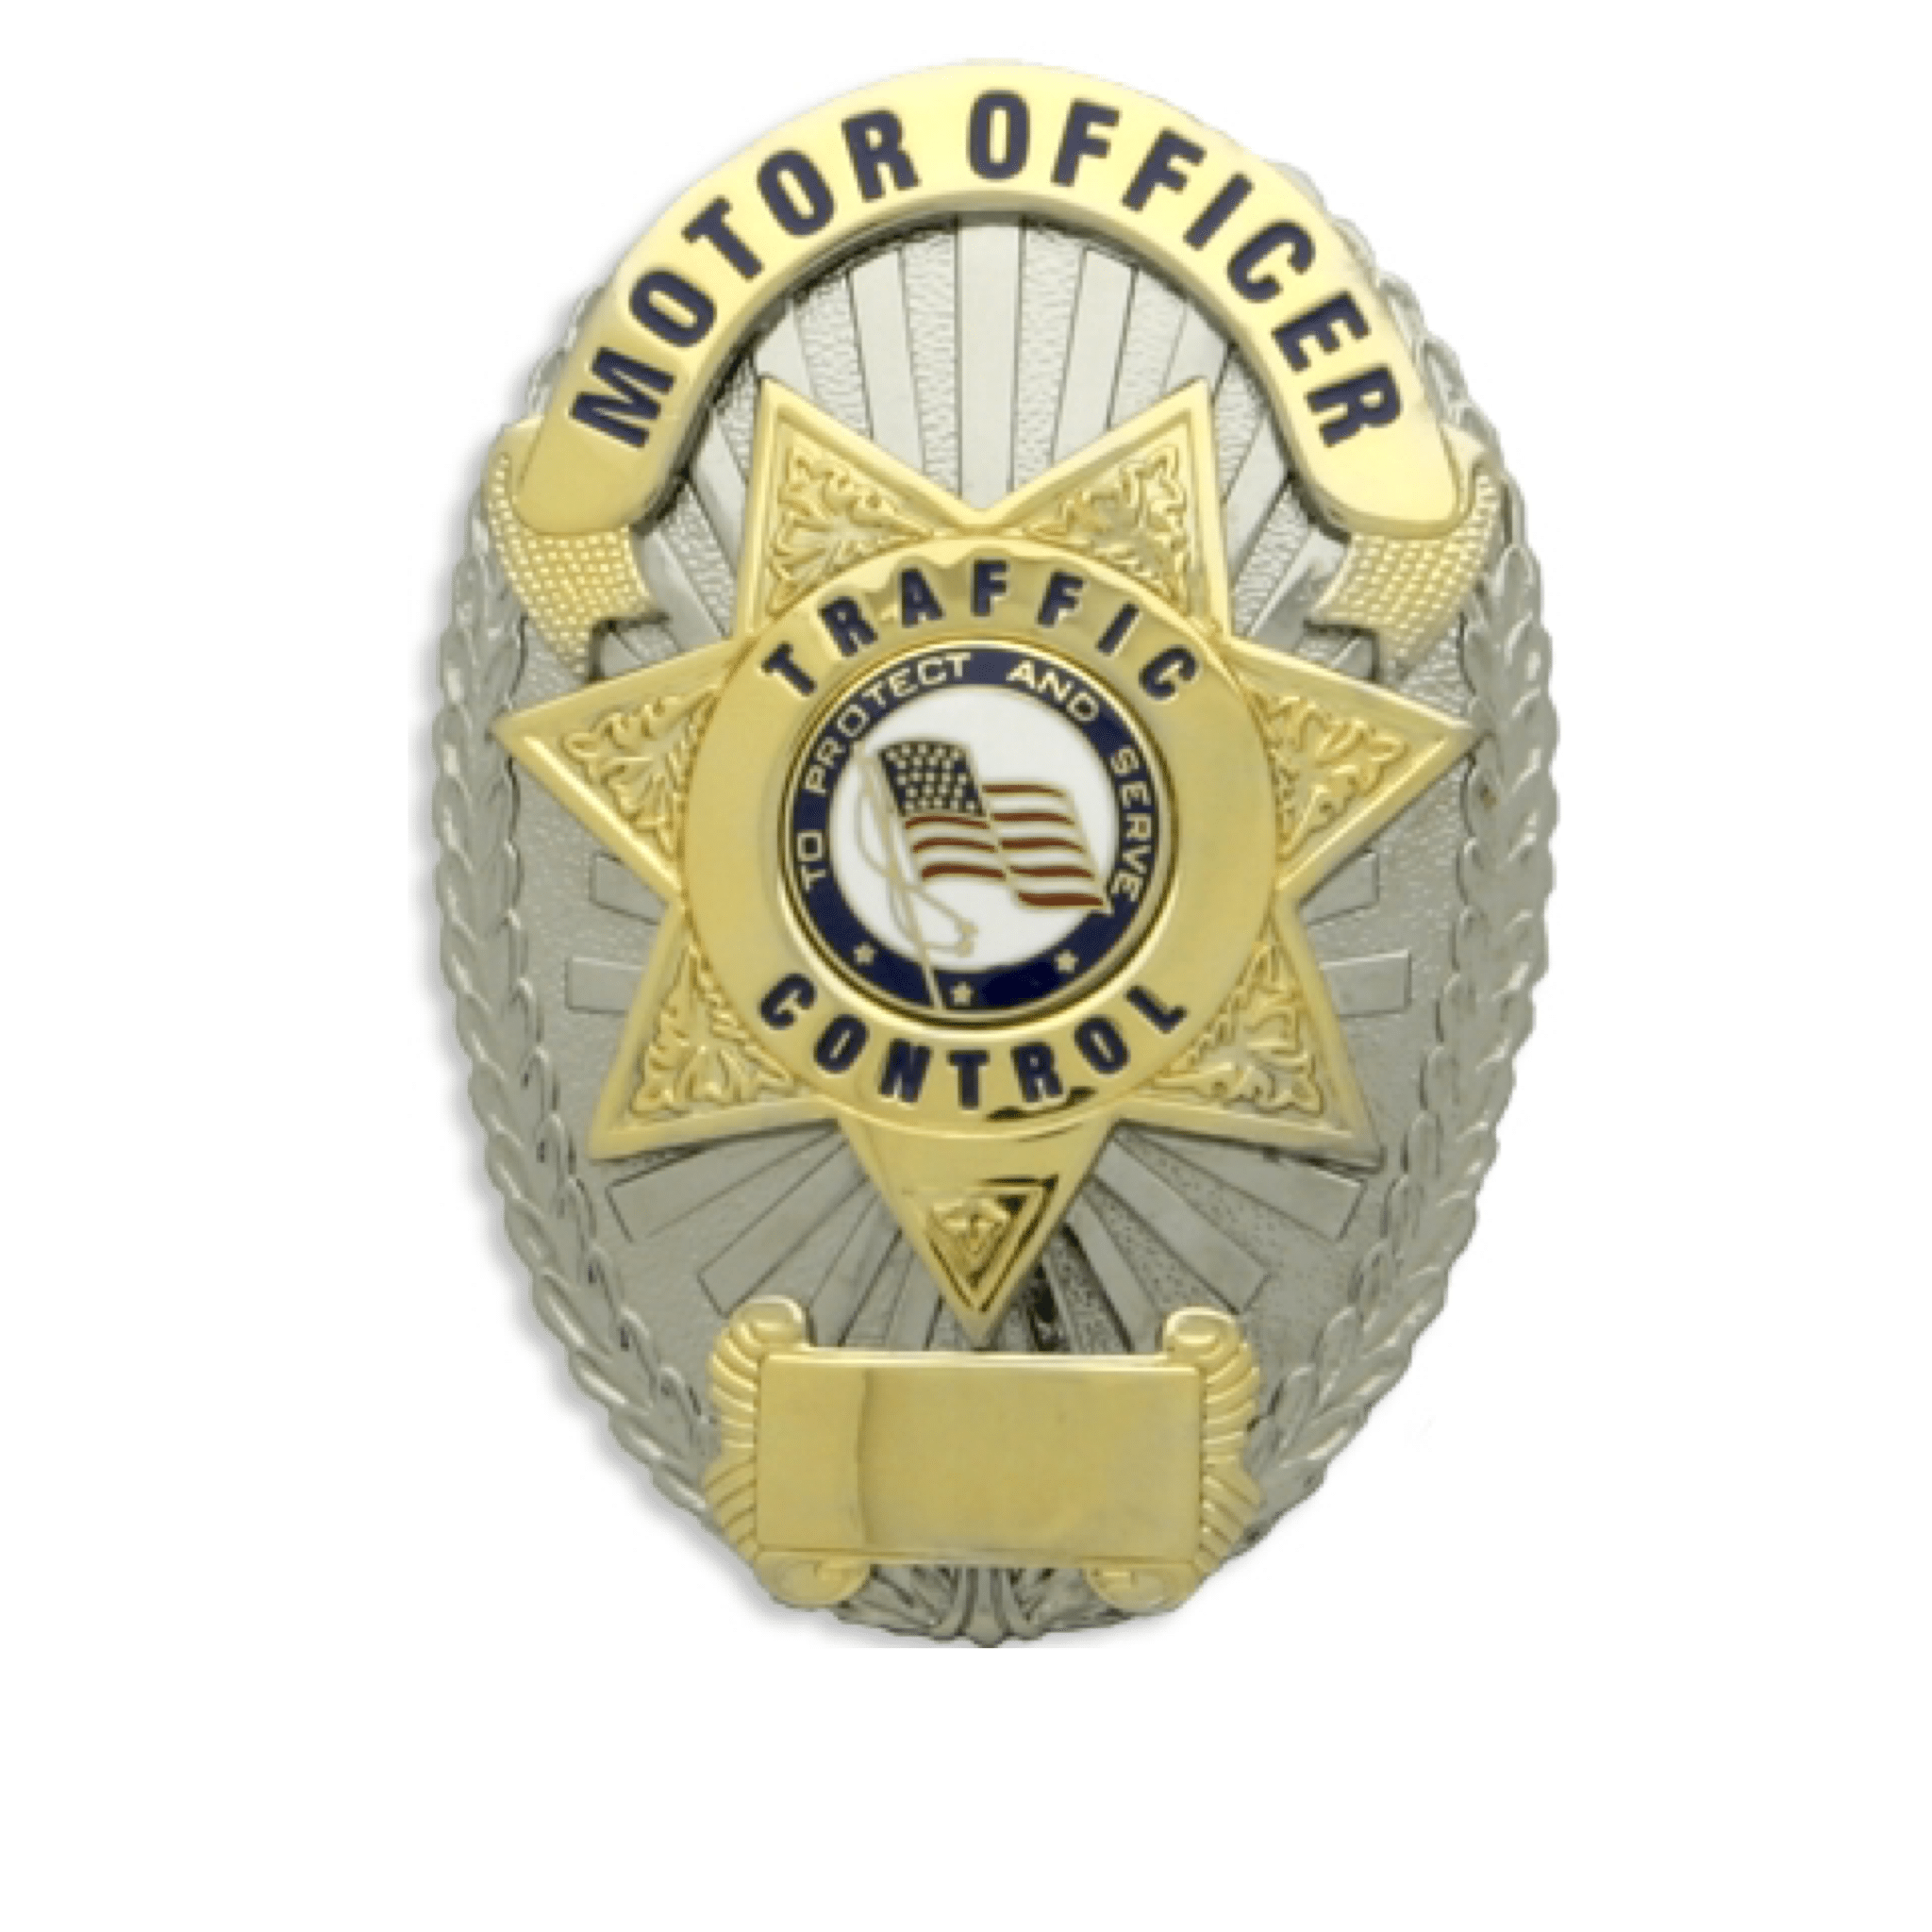 Motor Officer Logo - Motor Officer Badge (Oval Shield) Coast Uniforms and Accessories